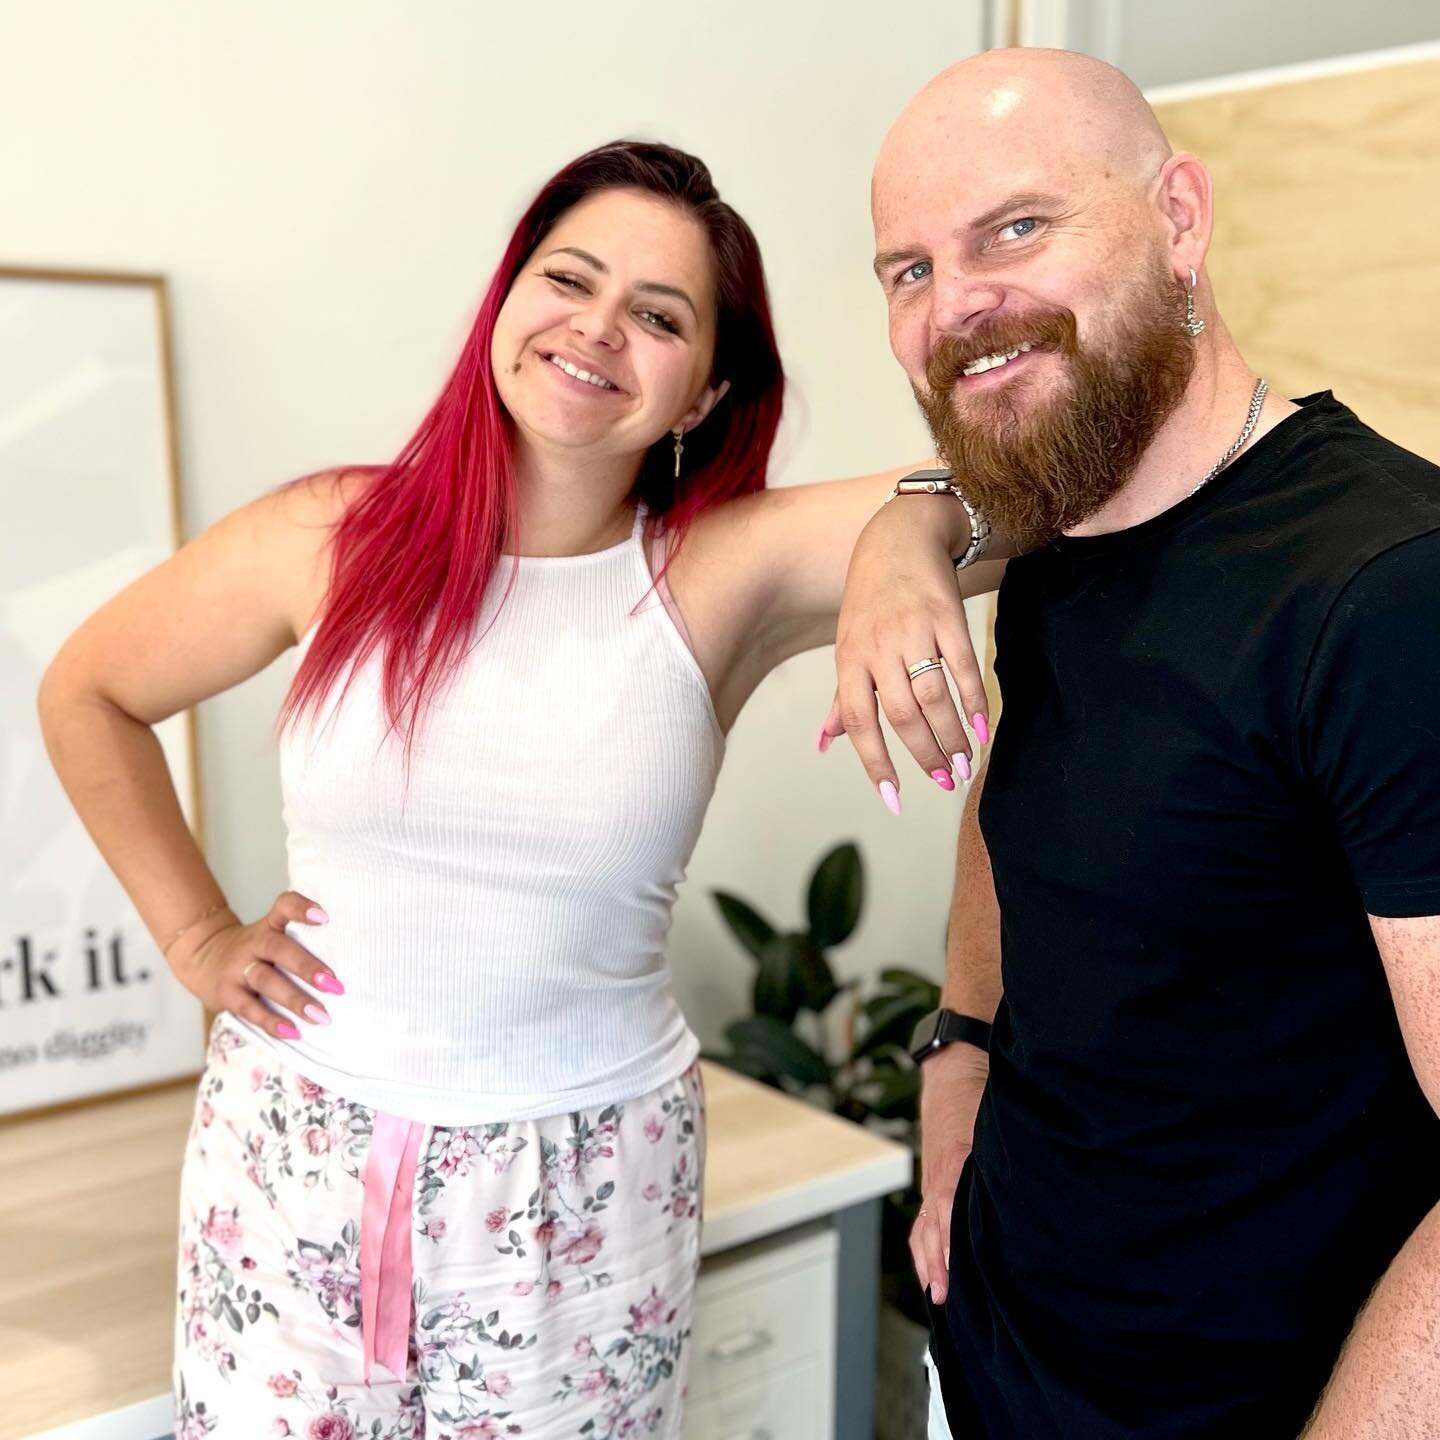 Meet Our New Members, dynamic duo Alex &amp; Kristina!

This&nbsp;power couple is taking the business world by storm but they also bring the best vibes to our coworking space!! Allow us to introduce you to the unstoppable force that is Alex &amp; Kri